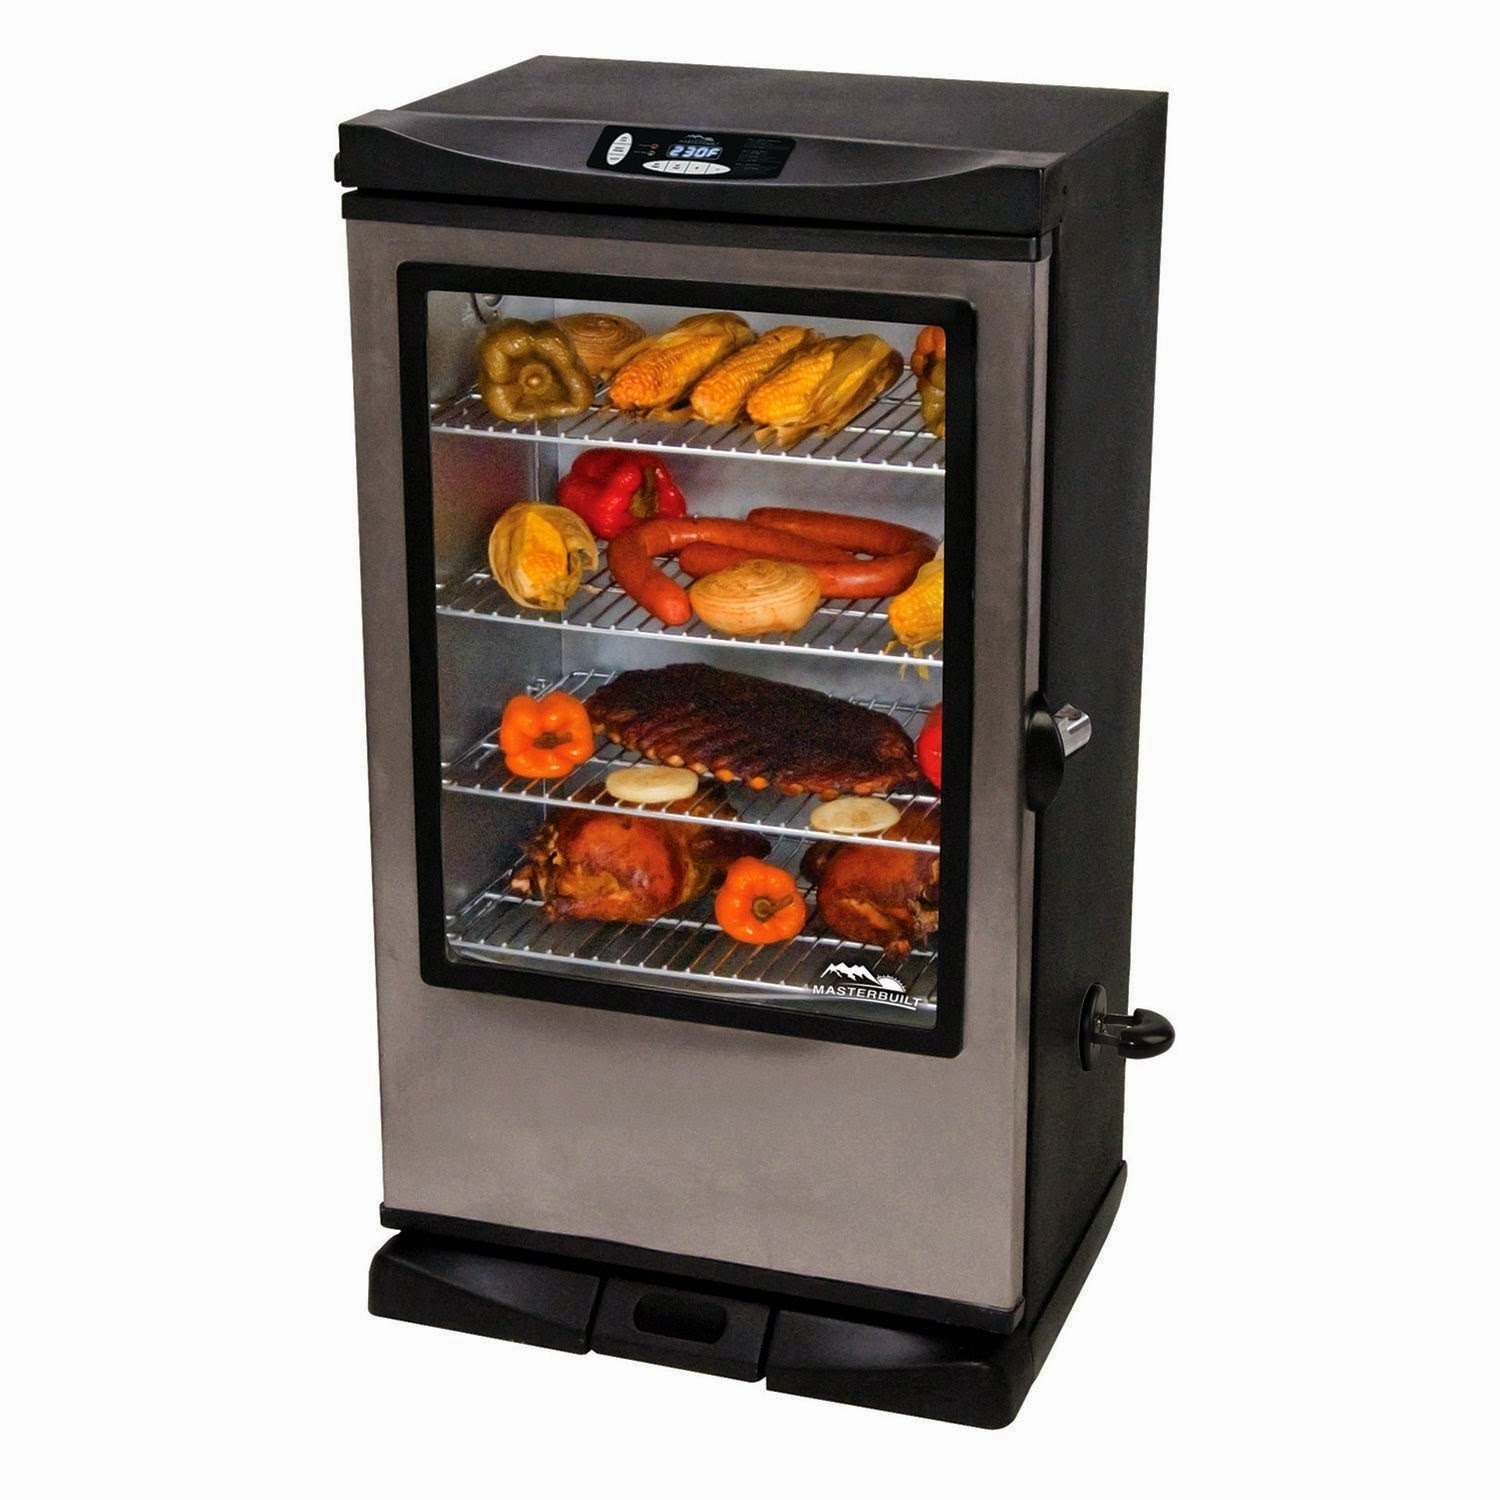 Masterbuilt 20075315 40" electric smoker with viewing window and RF controller, review, compare with 20070910 and 20070411